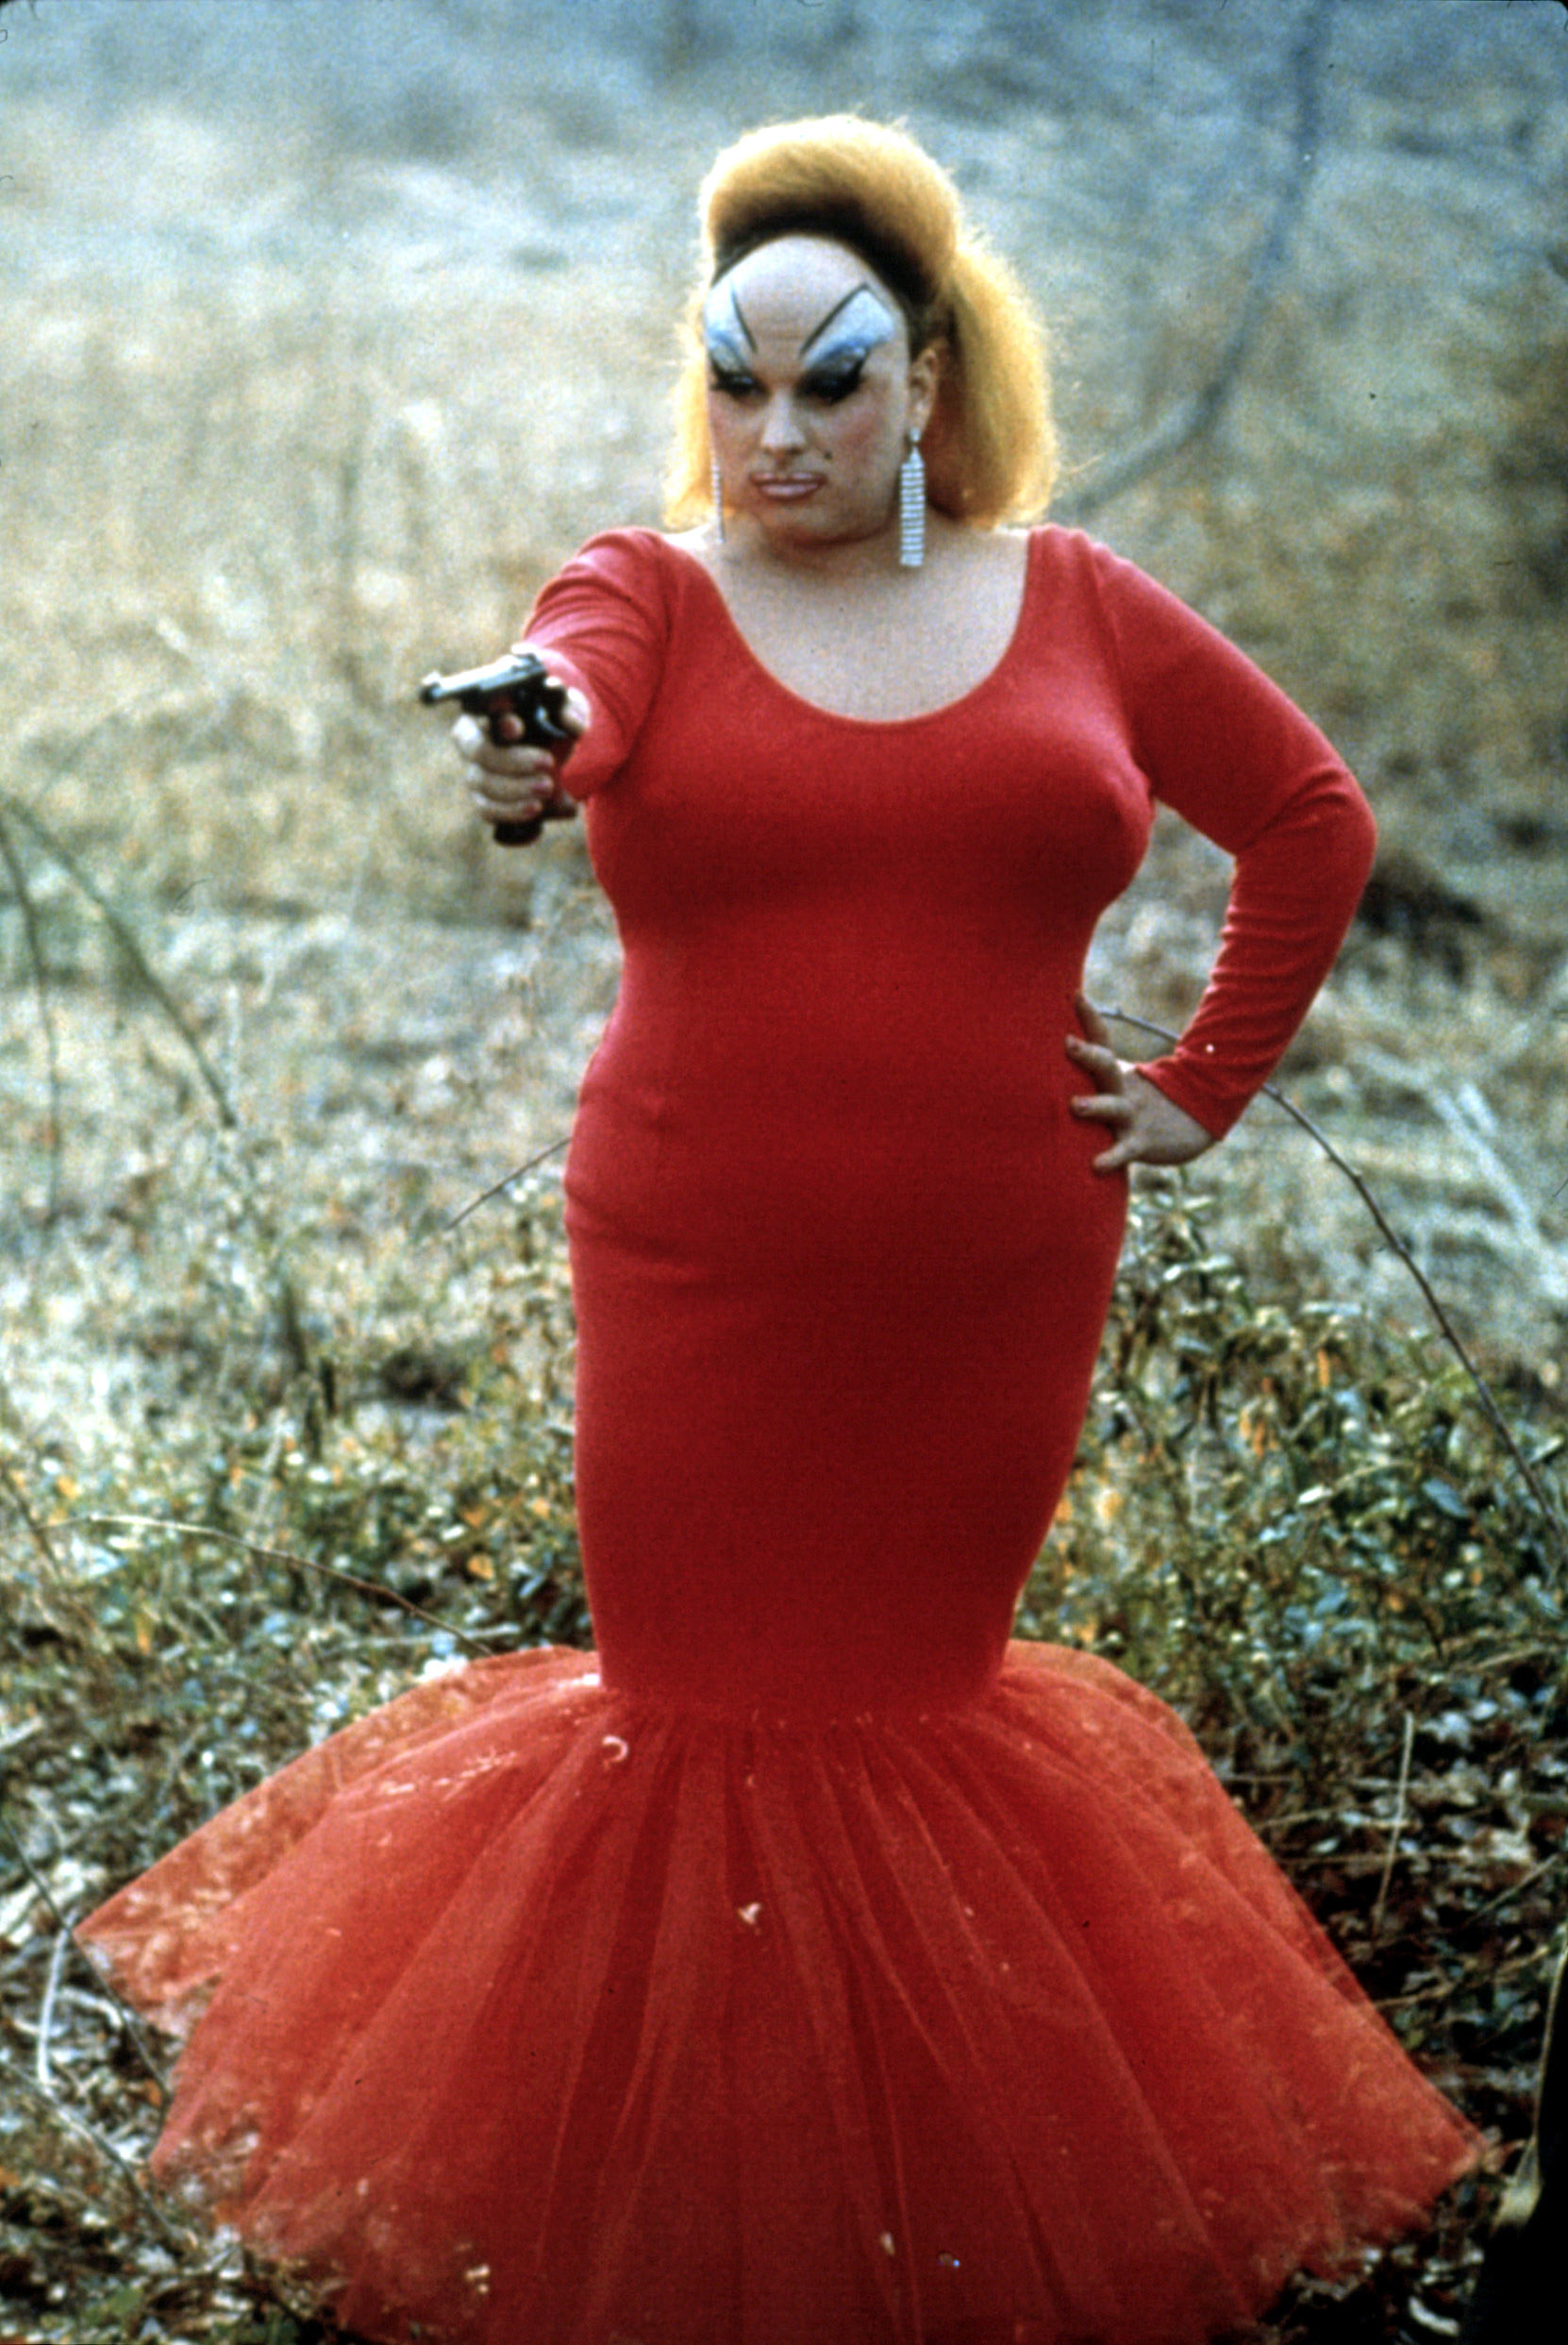 divine points a gun in a scene from the film pink flamingos